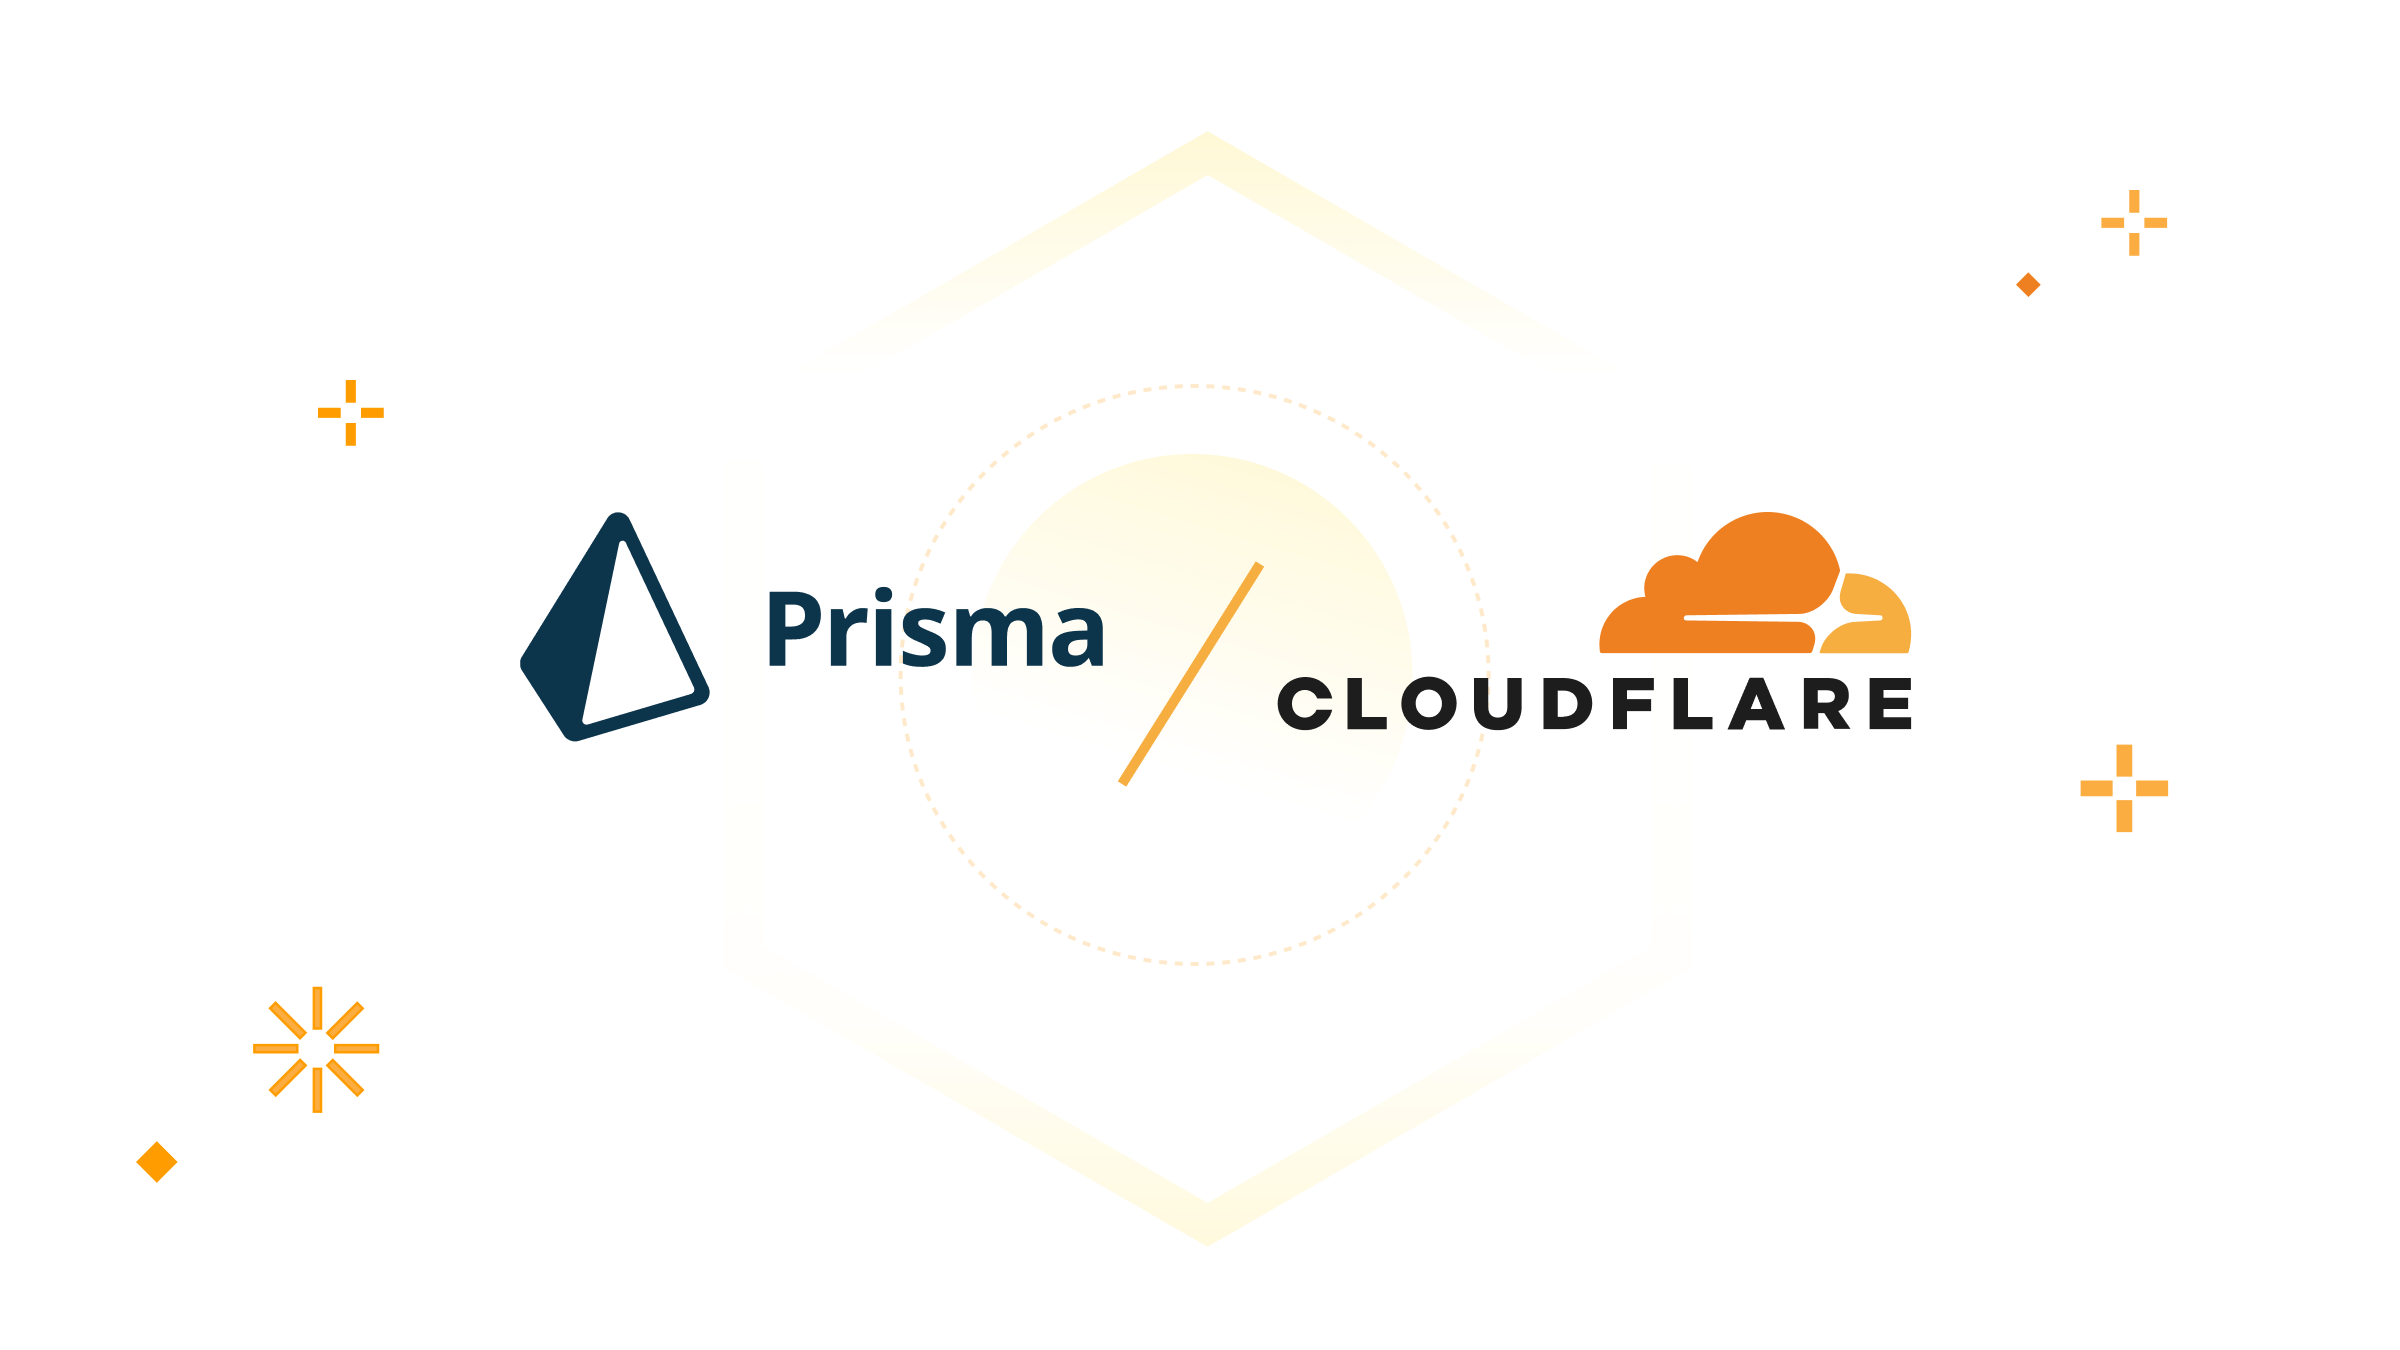 How Prisma saved 98% on distribution costs with Cloudflare R2